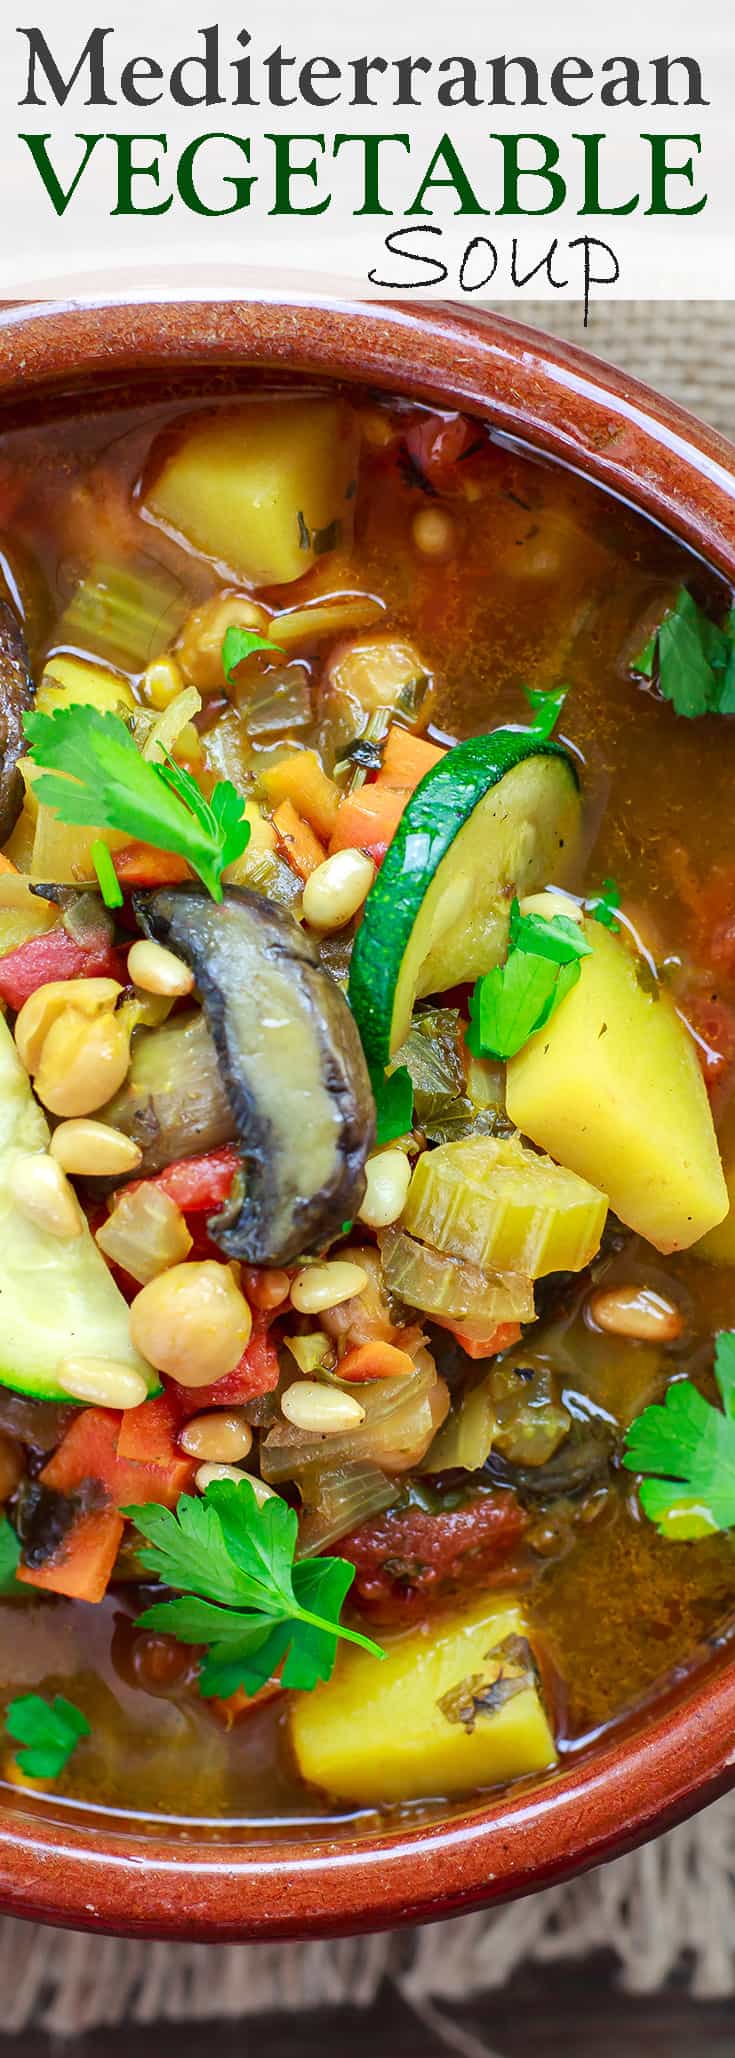 Mediterranean Homemade Vegetable Soup | The Mediterranean Dish. An easy homemade vegetable soup prepared Mediterranean-style. Quality vegetables, mushrooms, and chickpeas, bone broth with a dose of aromatics, fresh herbs, and bold Mediterranean spices all in one pot! A delicious way to "detox."